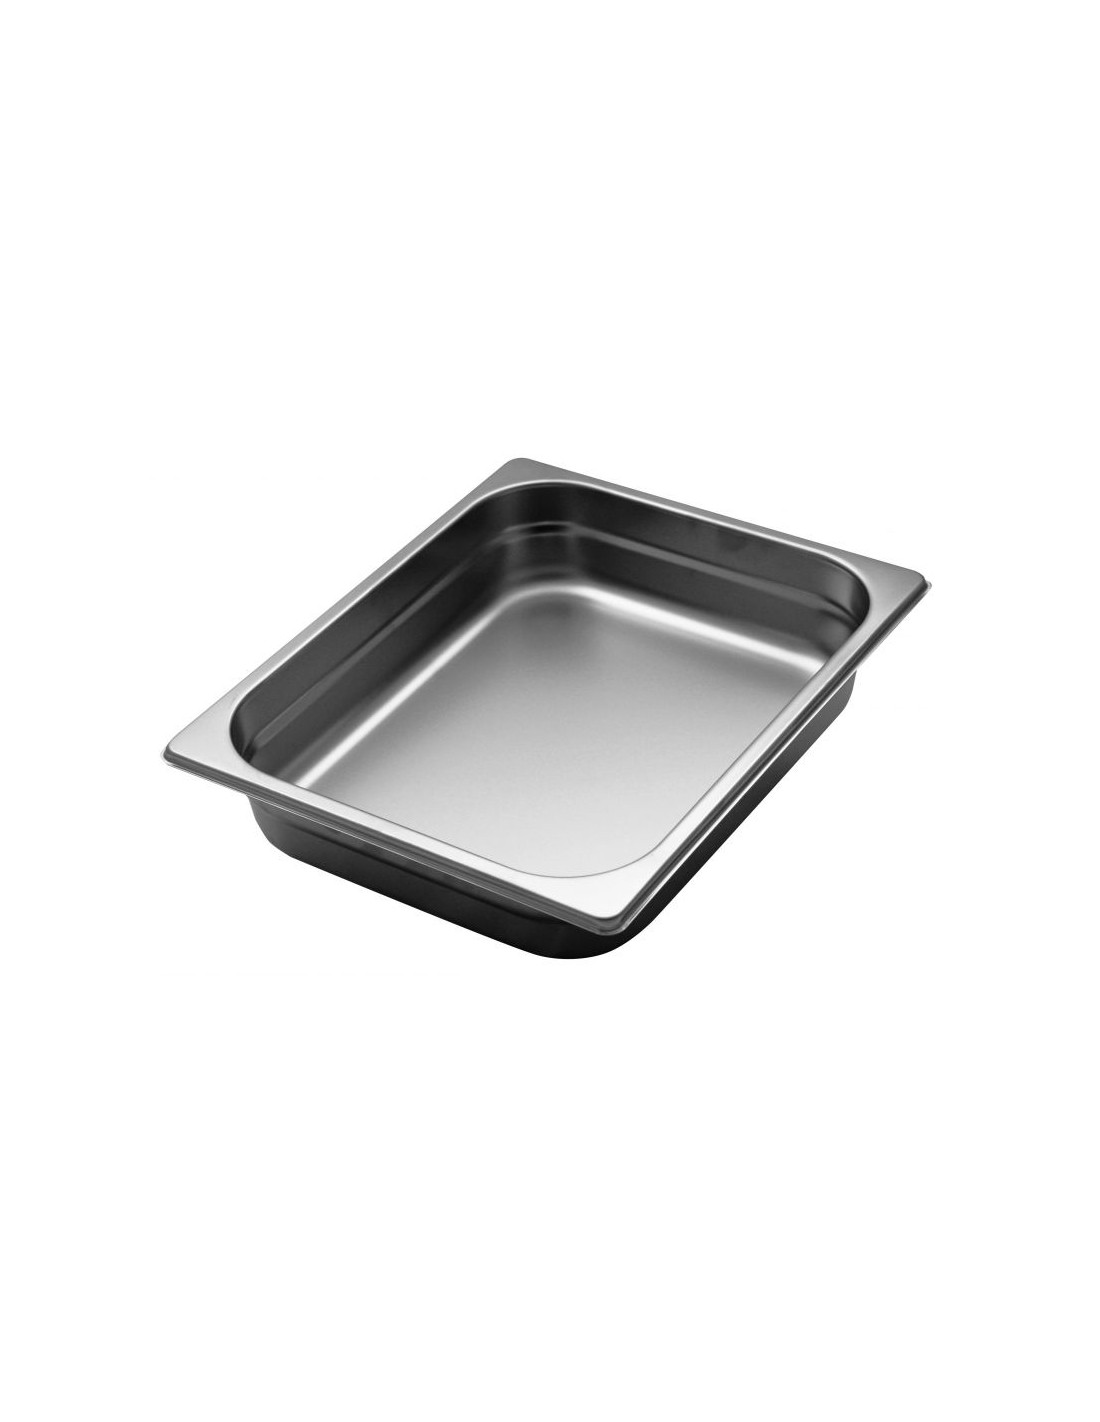 Stainless steel gastronorm containers 1/2 H. 6.5 cm - Capacity 4.2 liters - Dimensions 32.5 x 26.5 cm